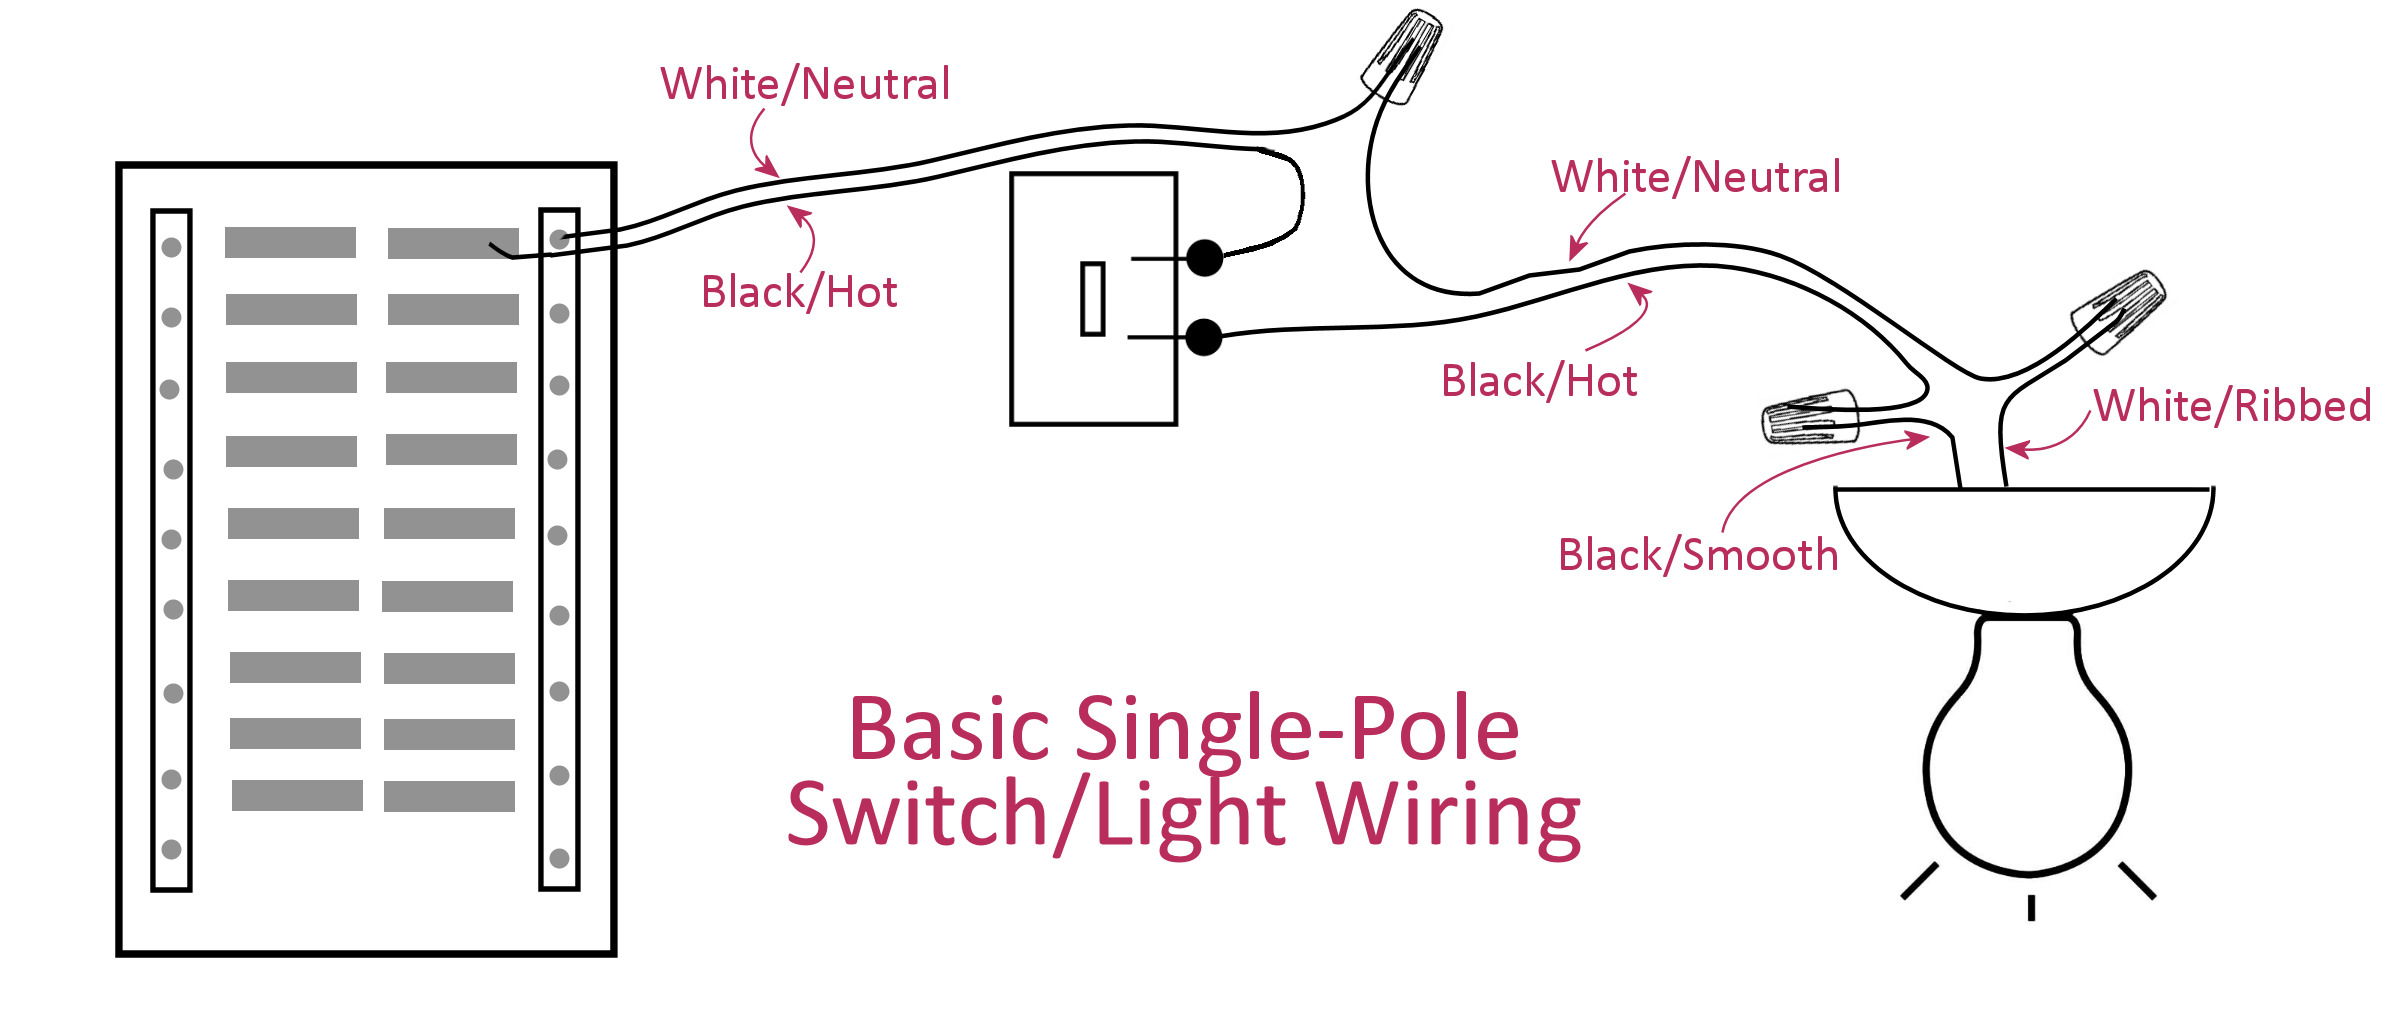 Single Pole 3 Way Light Switch Wiring Diagram from www.addicted2decorating.com